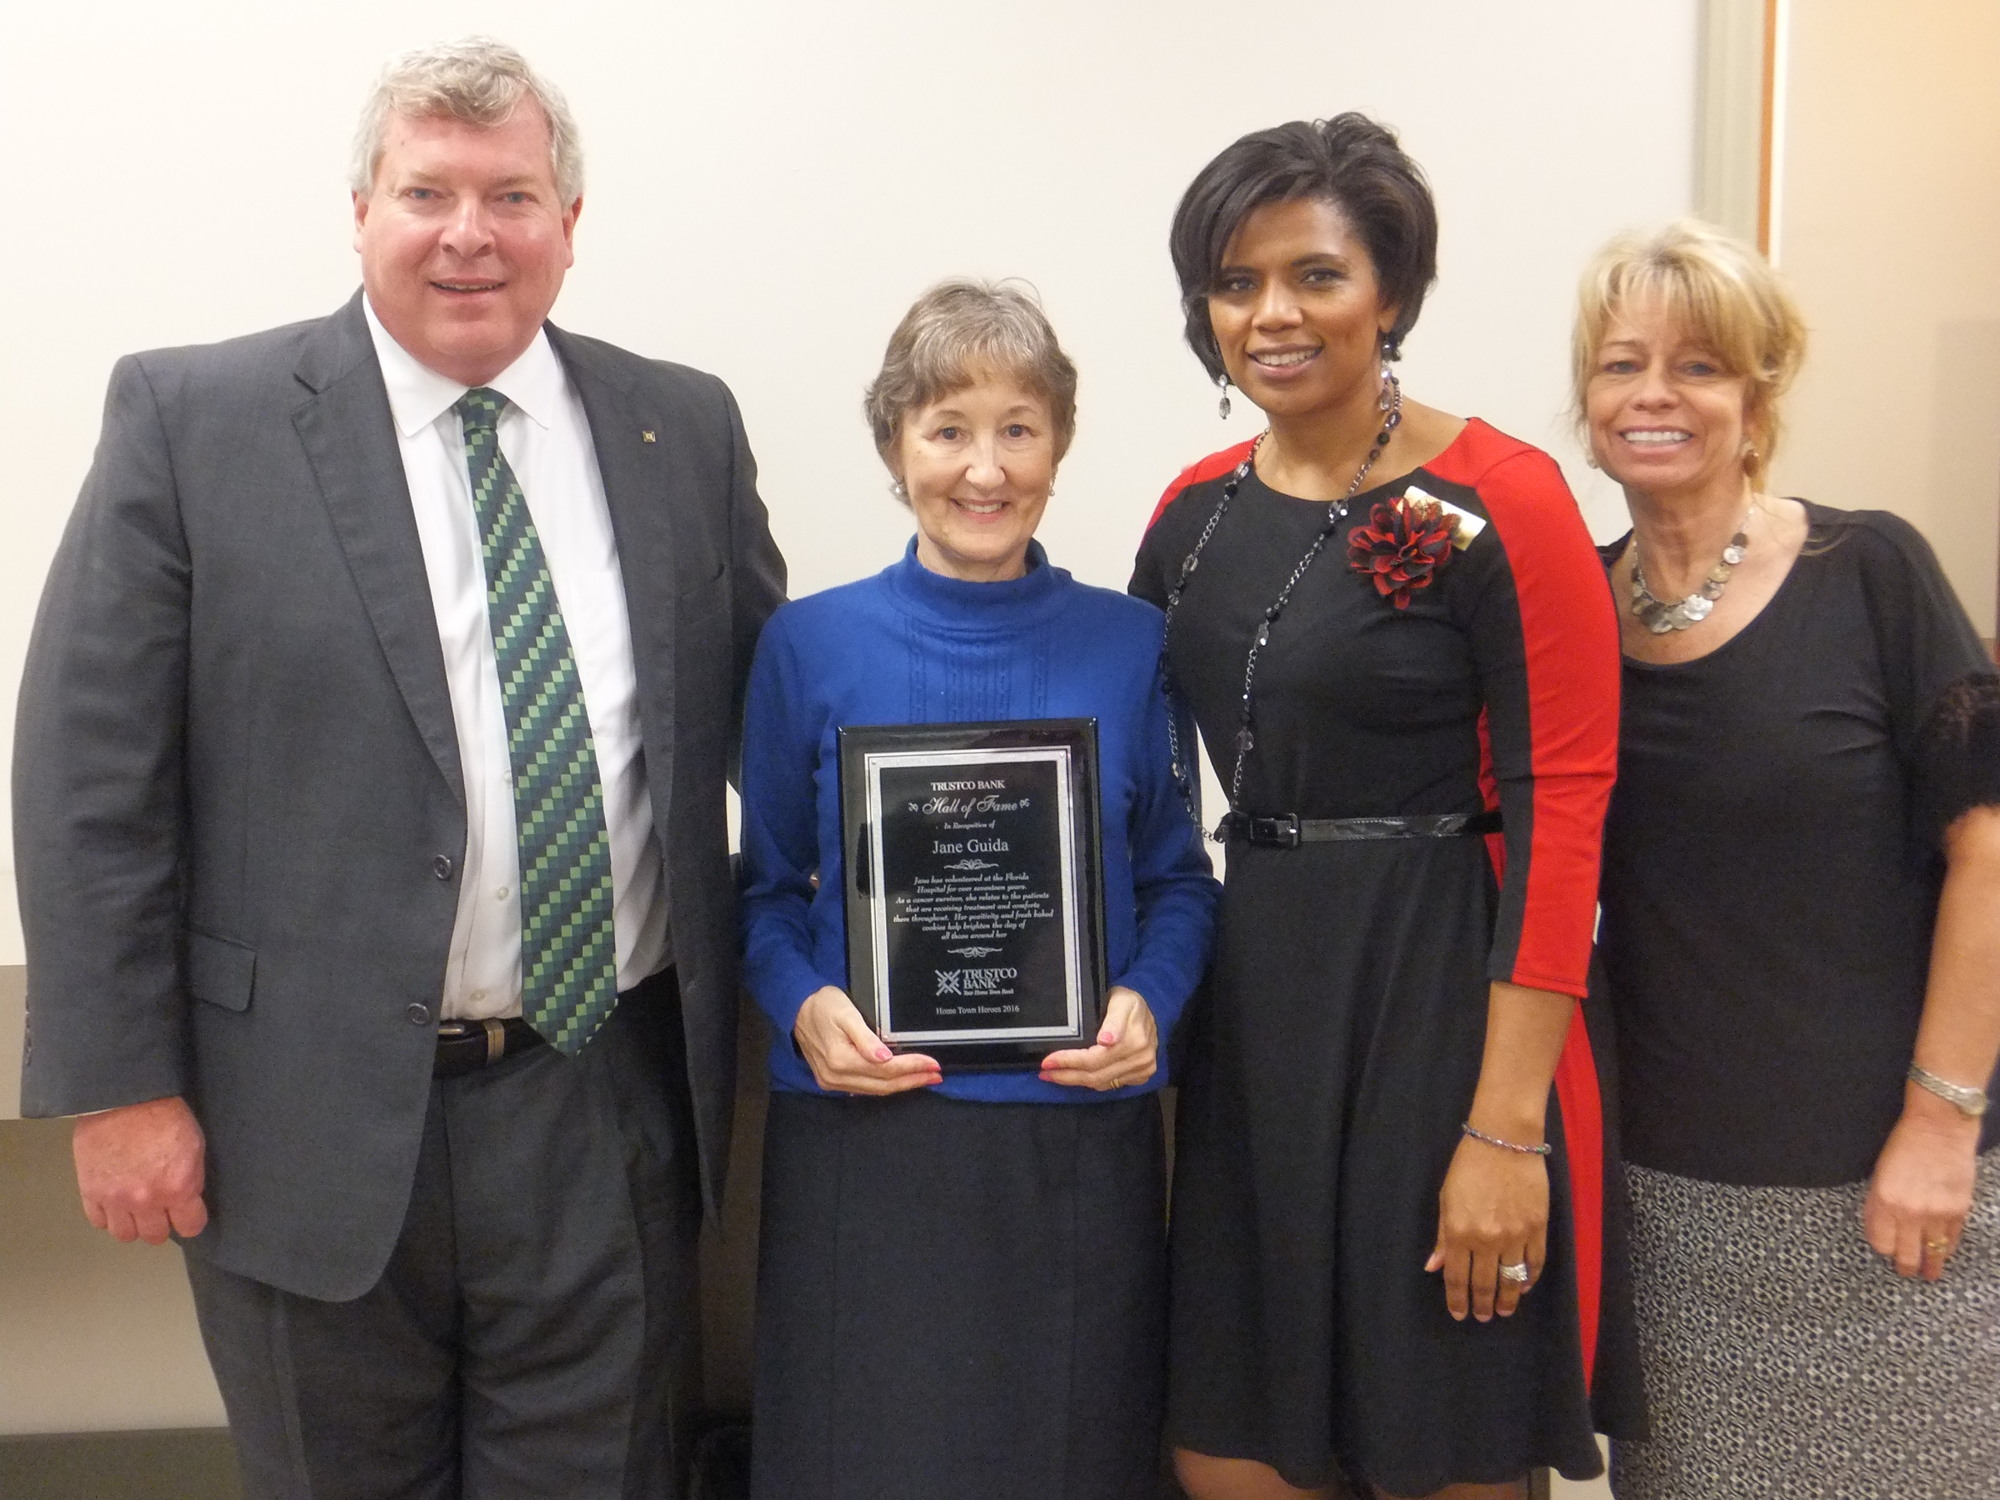 Jane Guida received Trustco Bank's Hometown Hero award in recognition of her service to Orlando Health. Left to right: Eric Schreck, Florida Regional President, Jane Guida, Messerette Newsome and  Shari Bryant.